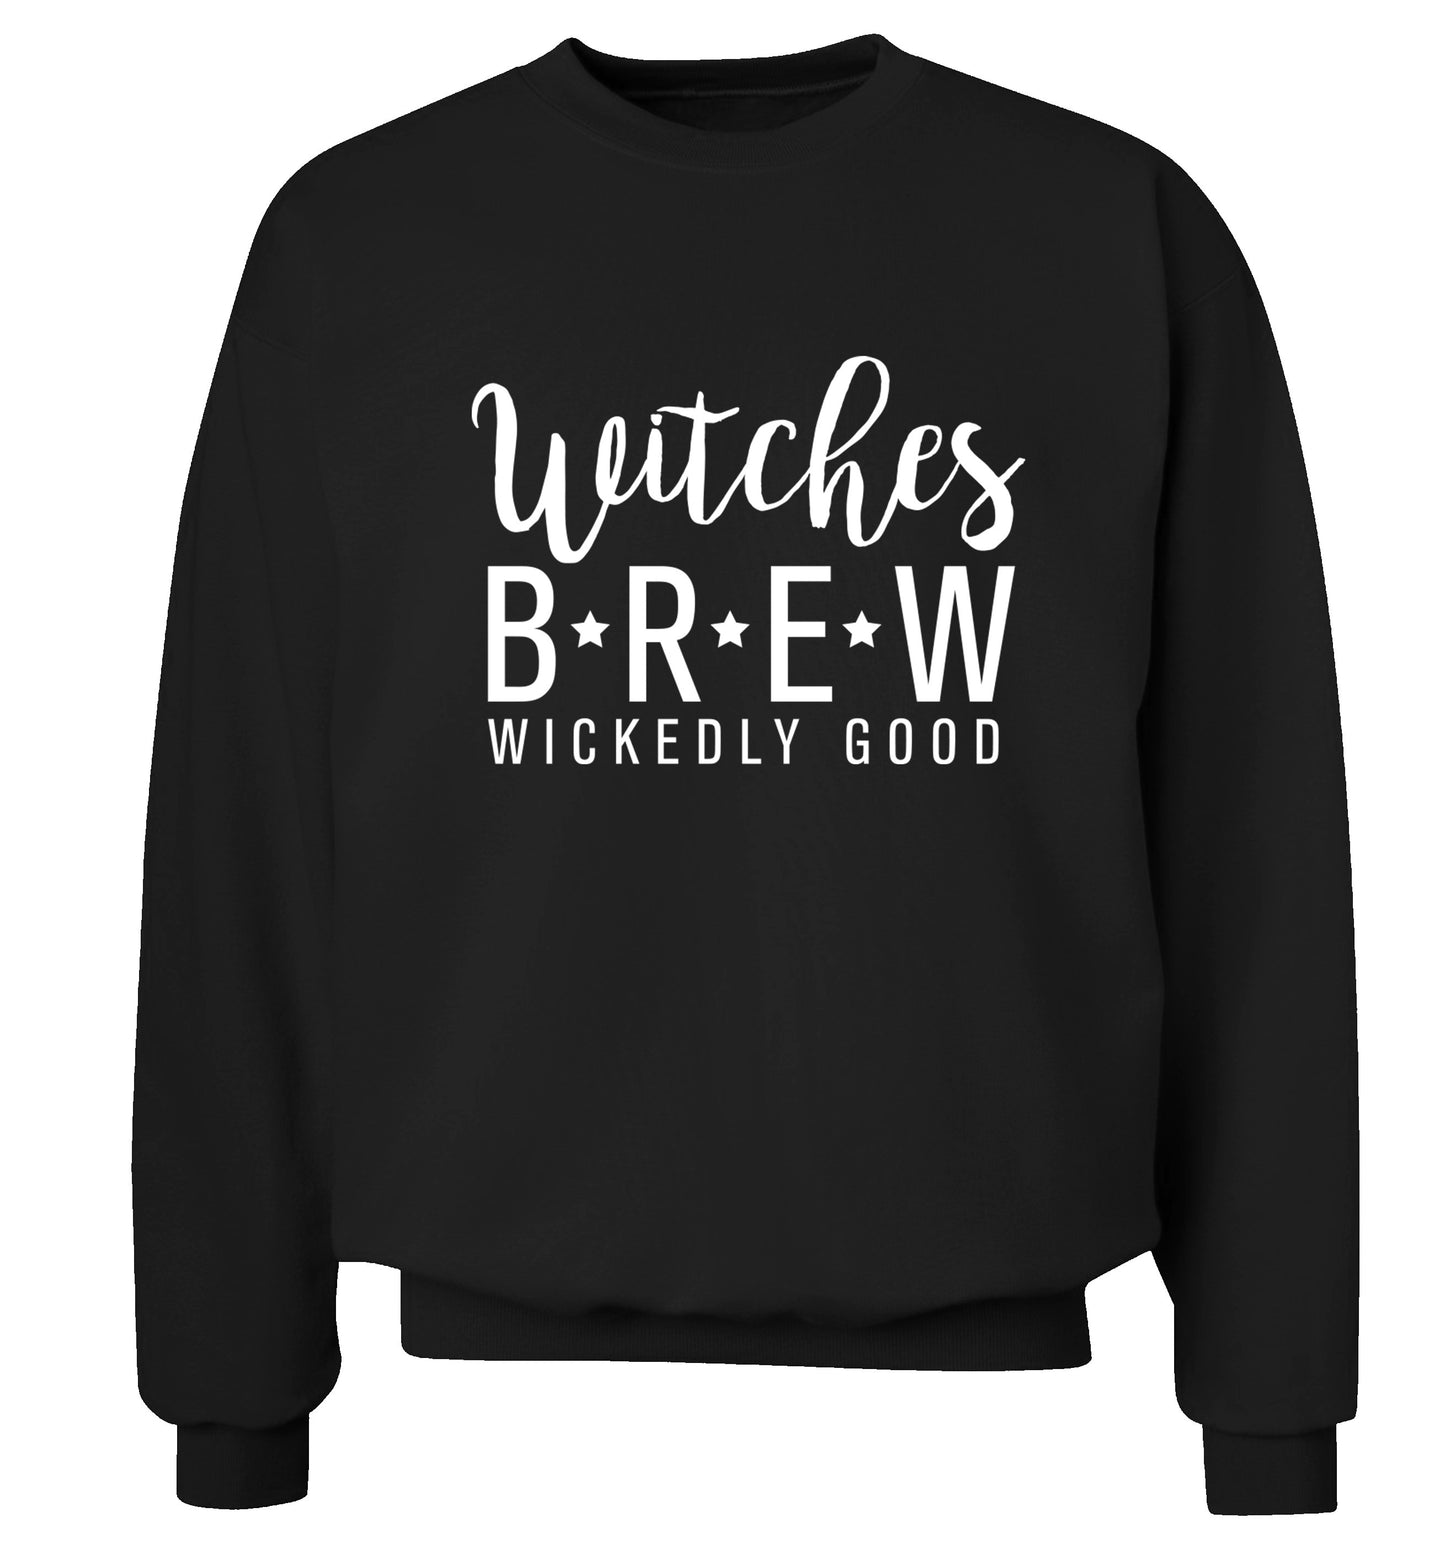 Witches Brew wickedly good Adult's unisex black Sweater 2XL